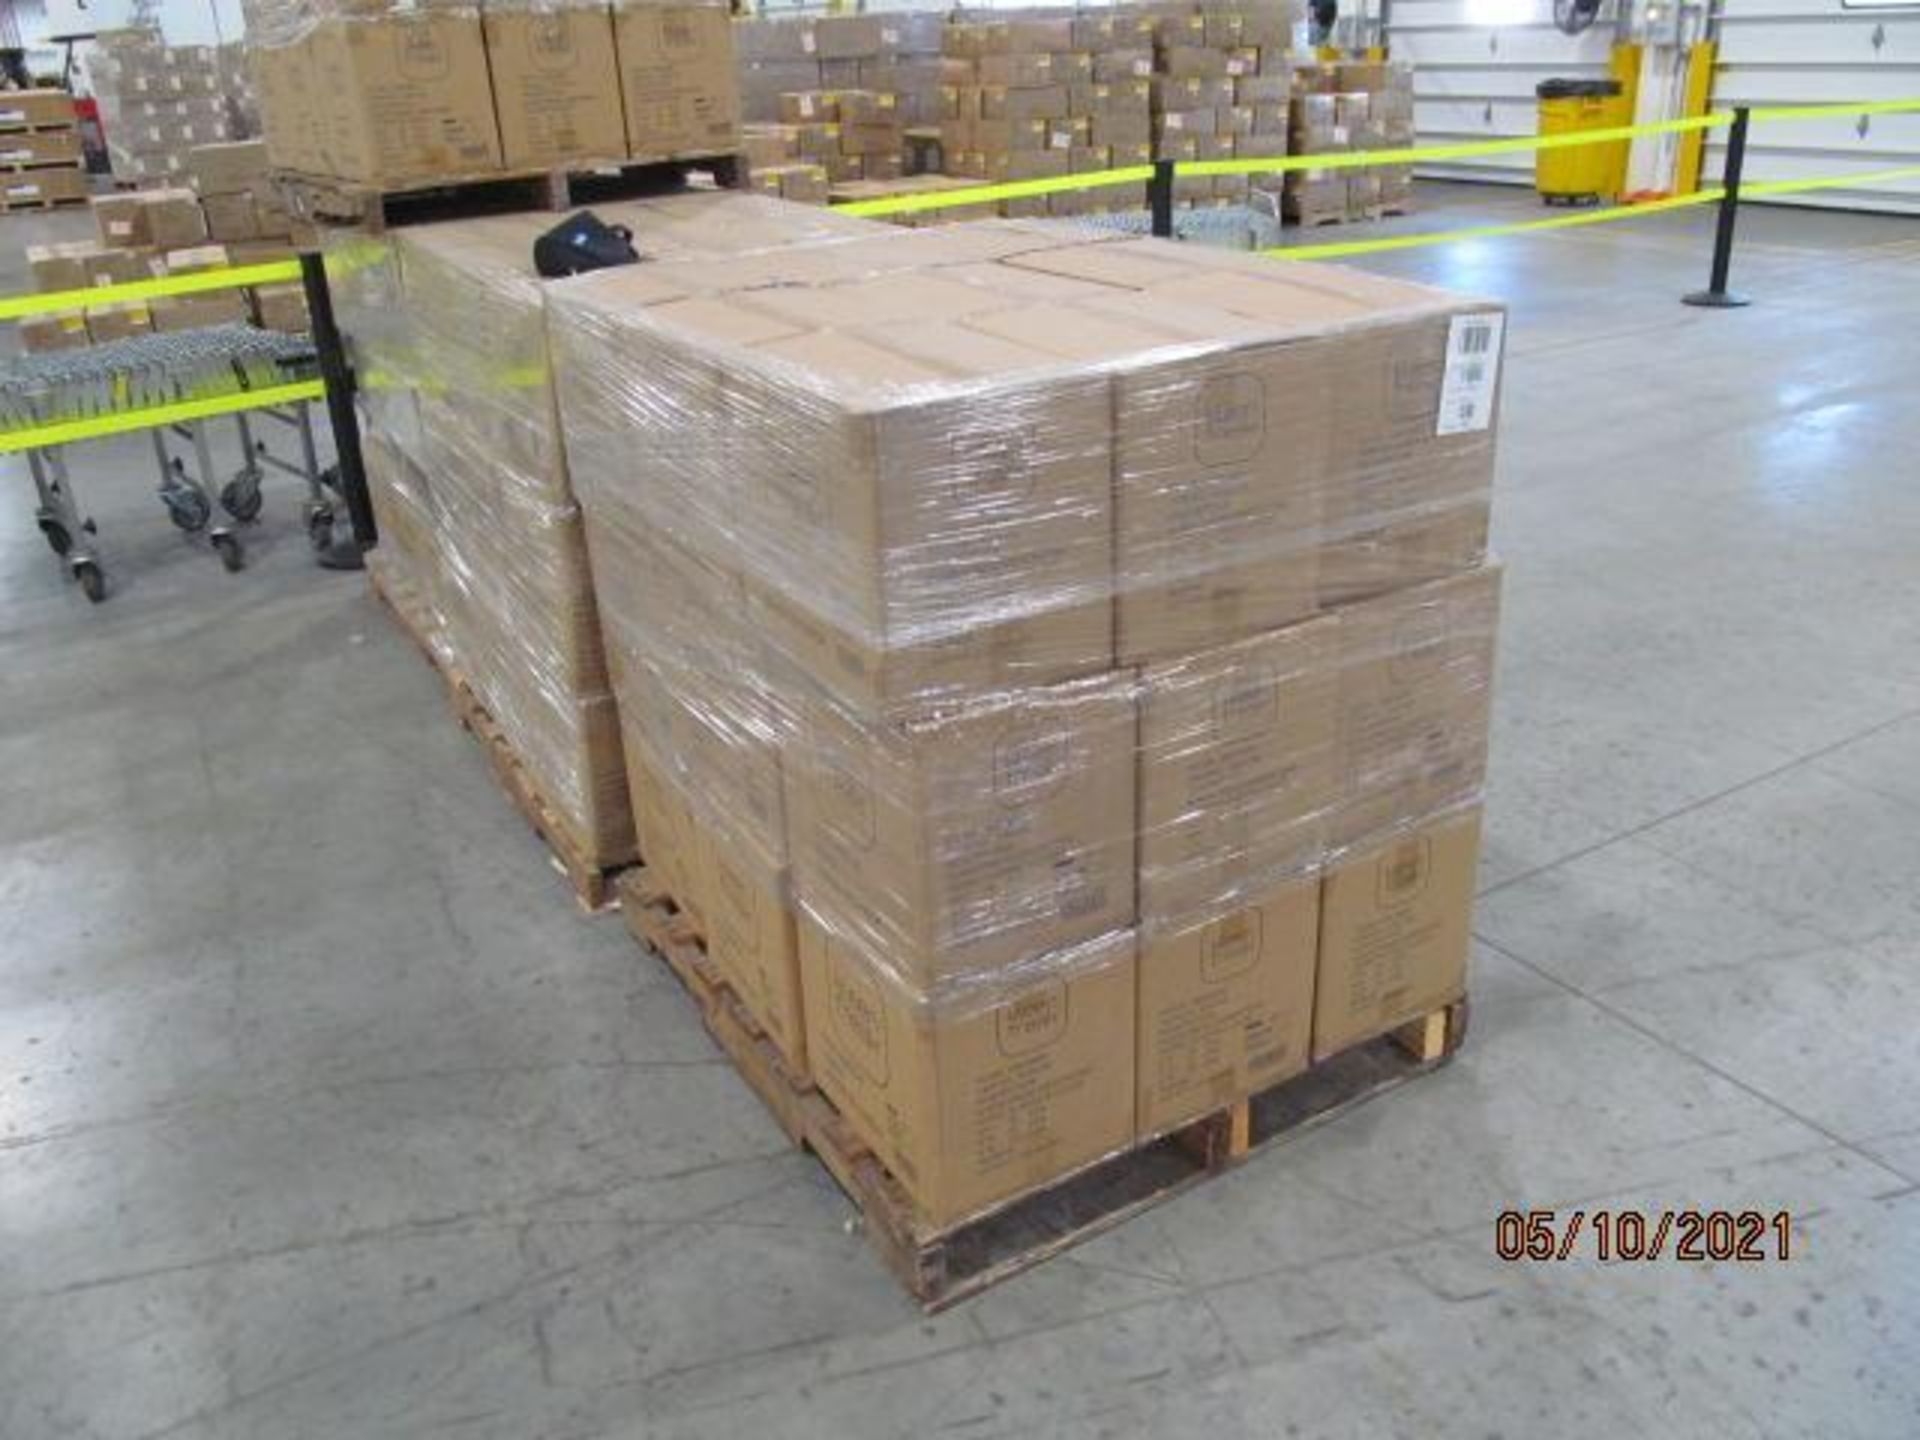 Lot of Waxman Kleen Freak Sanitizing Wipes consisting of 134,784 packages on 208 pallets. Each packa - Image 7 of 11